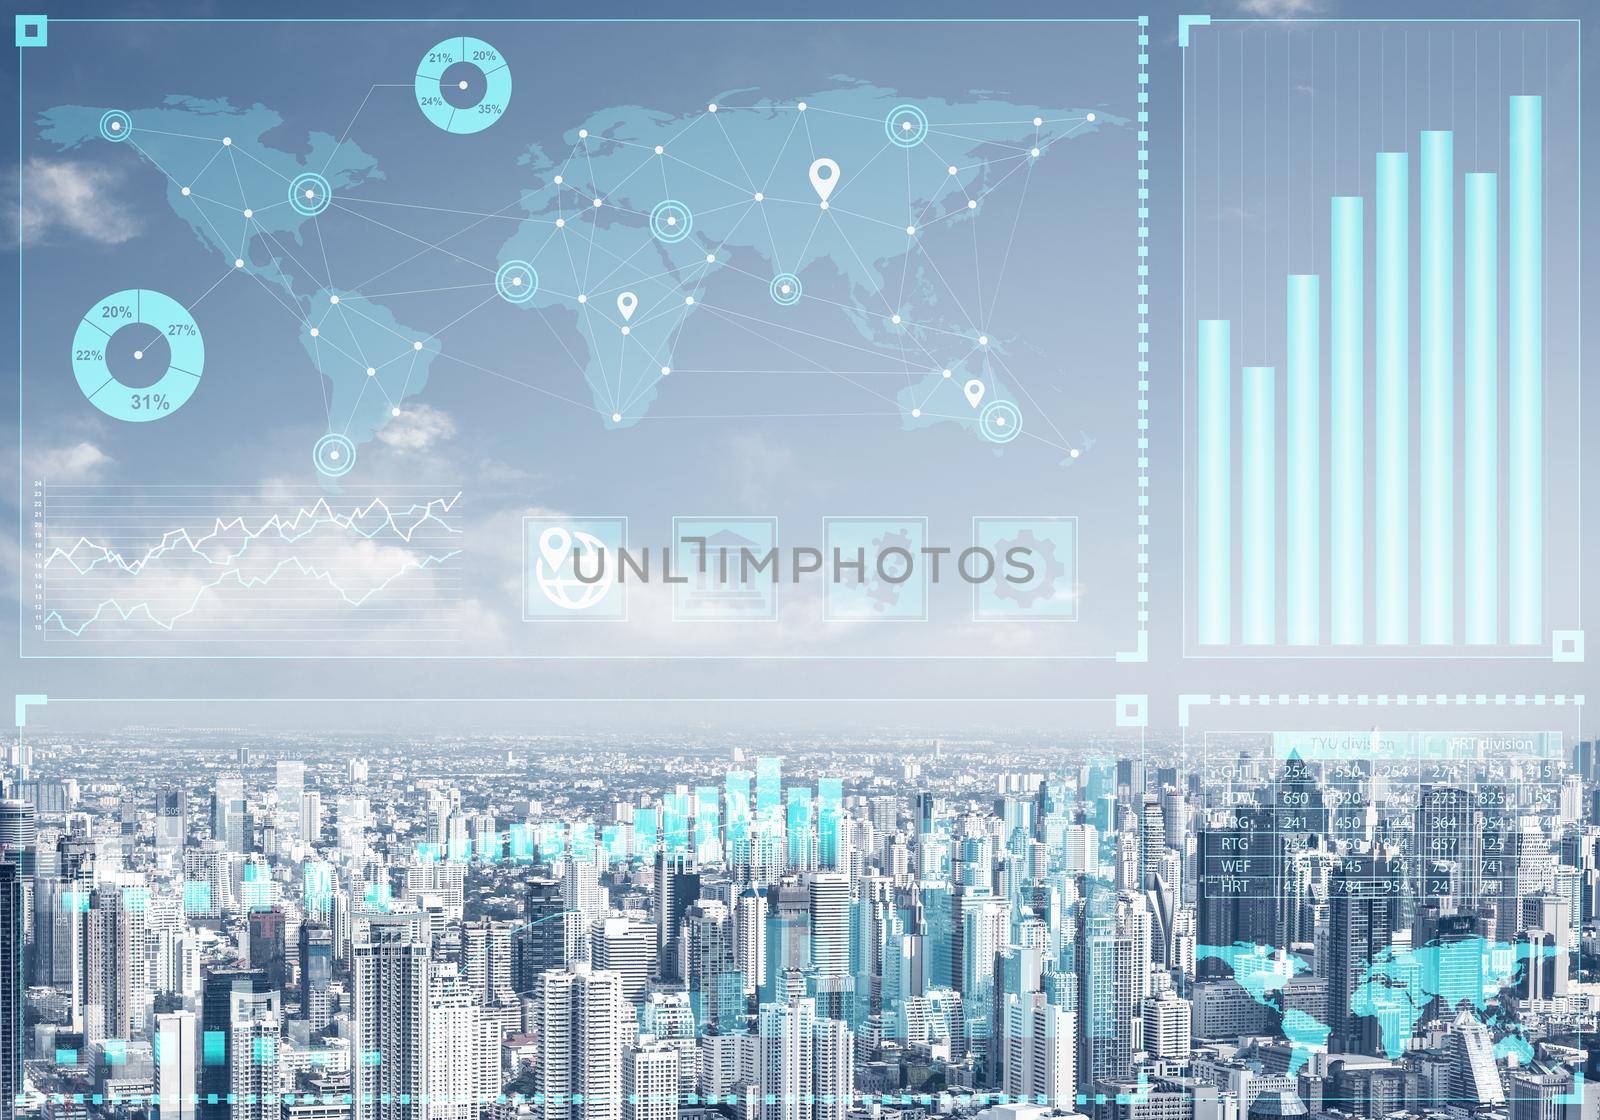 Double exposure business concept with abstract financial graphics on background of modern business district. Digital economy and global online trading. Investment management and strategy planning